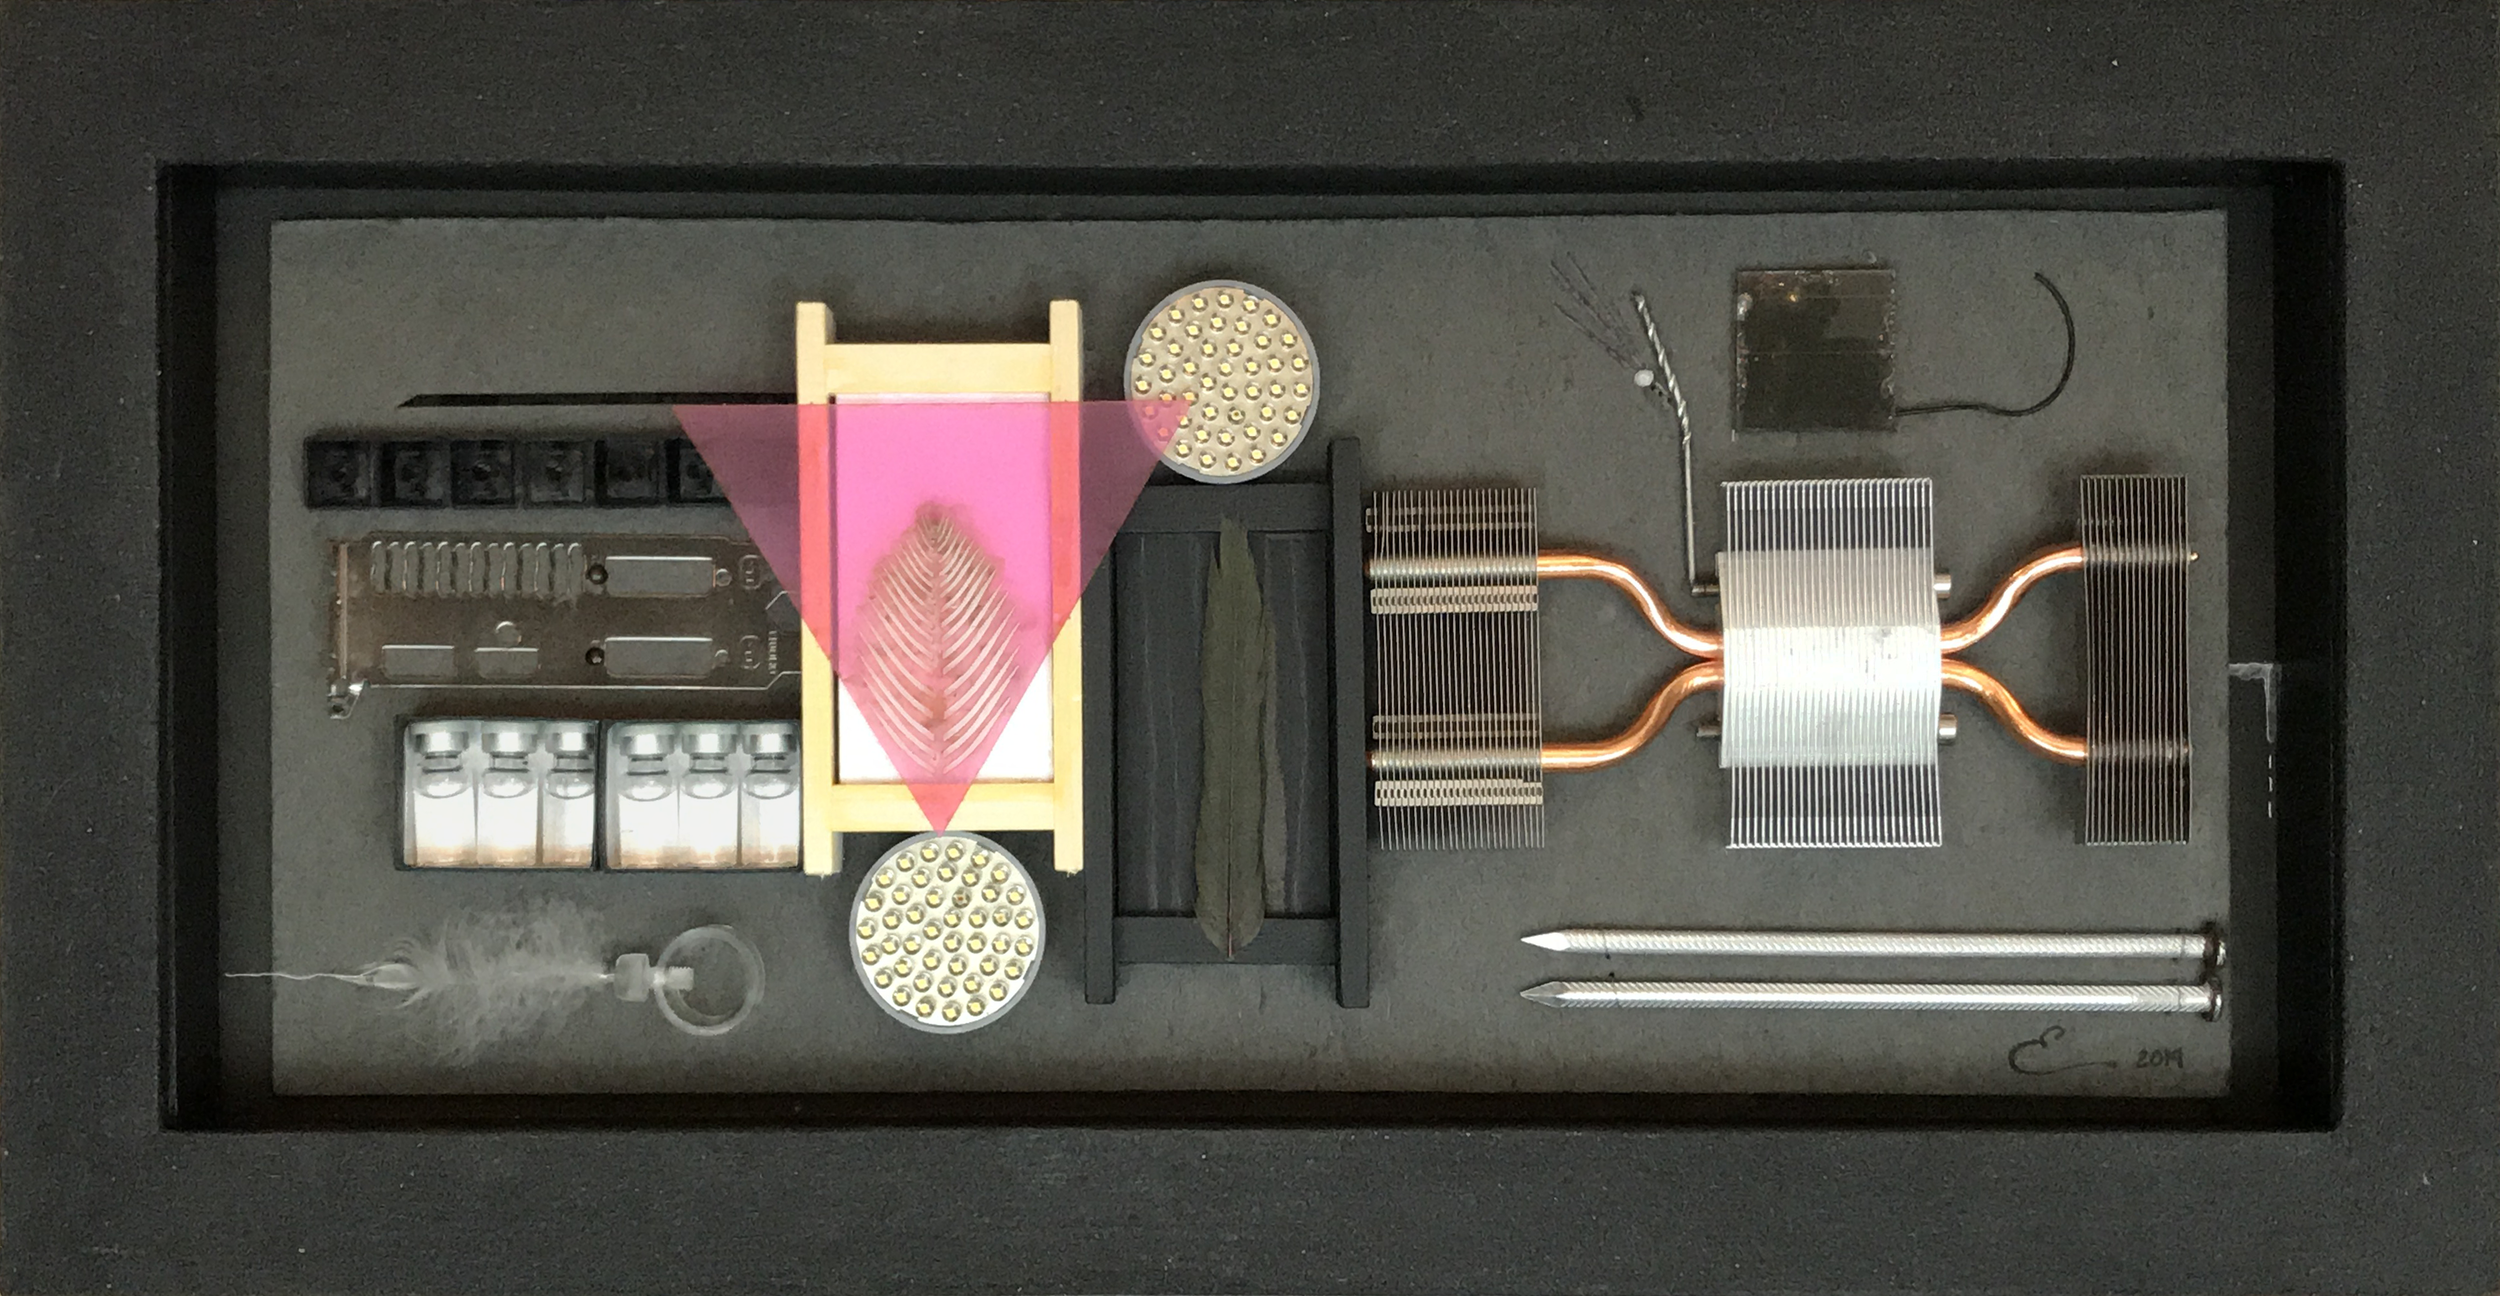   In Which She Considered Options   2019, 21.5"w x 9.5"h x 2.5"d, Mixed Media including various metals, wood, plastic, heat sink, cardboard, LED bulbs, feathers, glass, saline solution vials, keyboard keys, aluminum gutter nails, drill bit, paint, wi